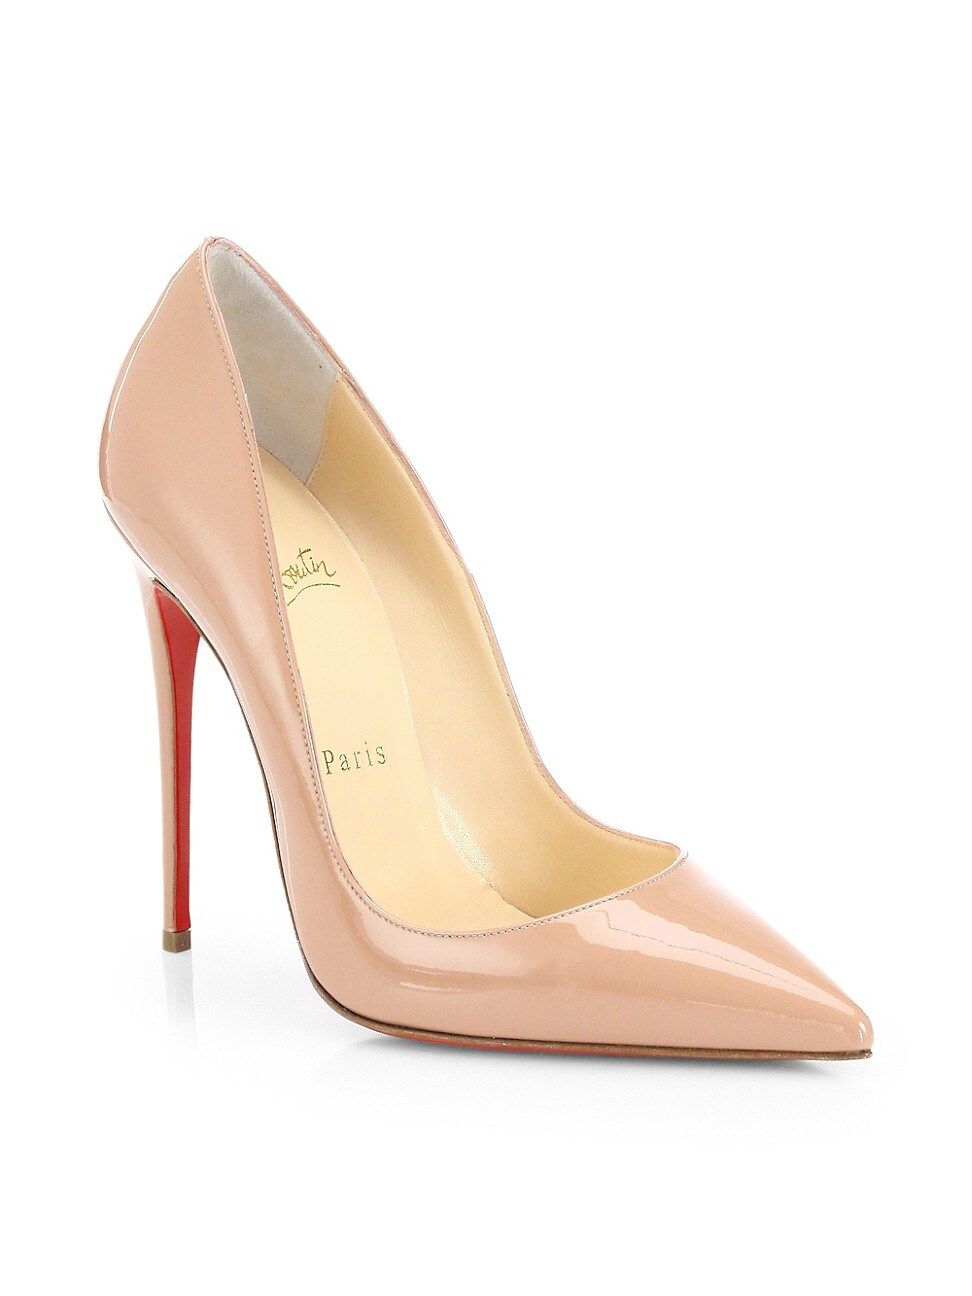 Christian Louboutin Women's So Kate 120 Patent Leather Pumps - Nude - Size 39 (9) | Saks Fifth Avenue